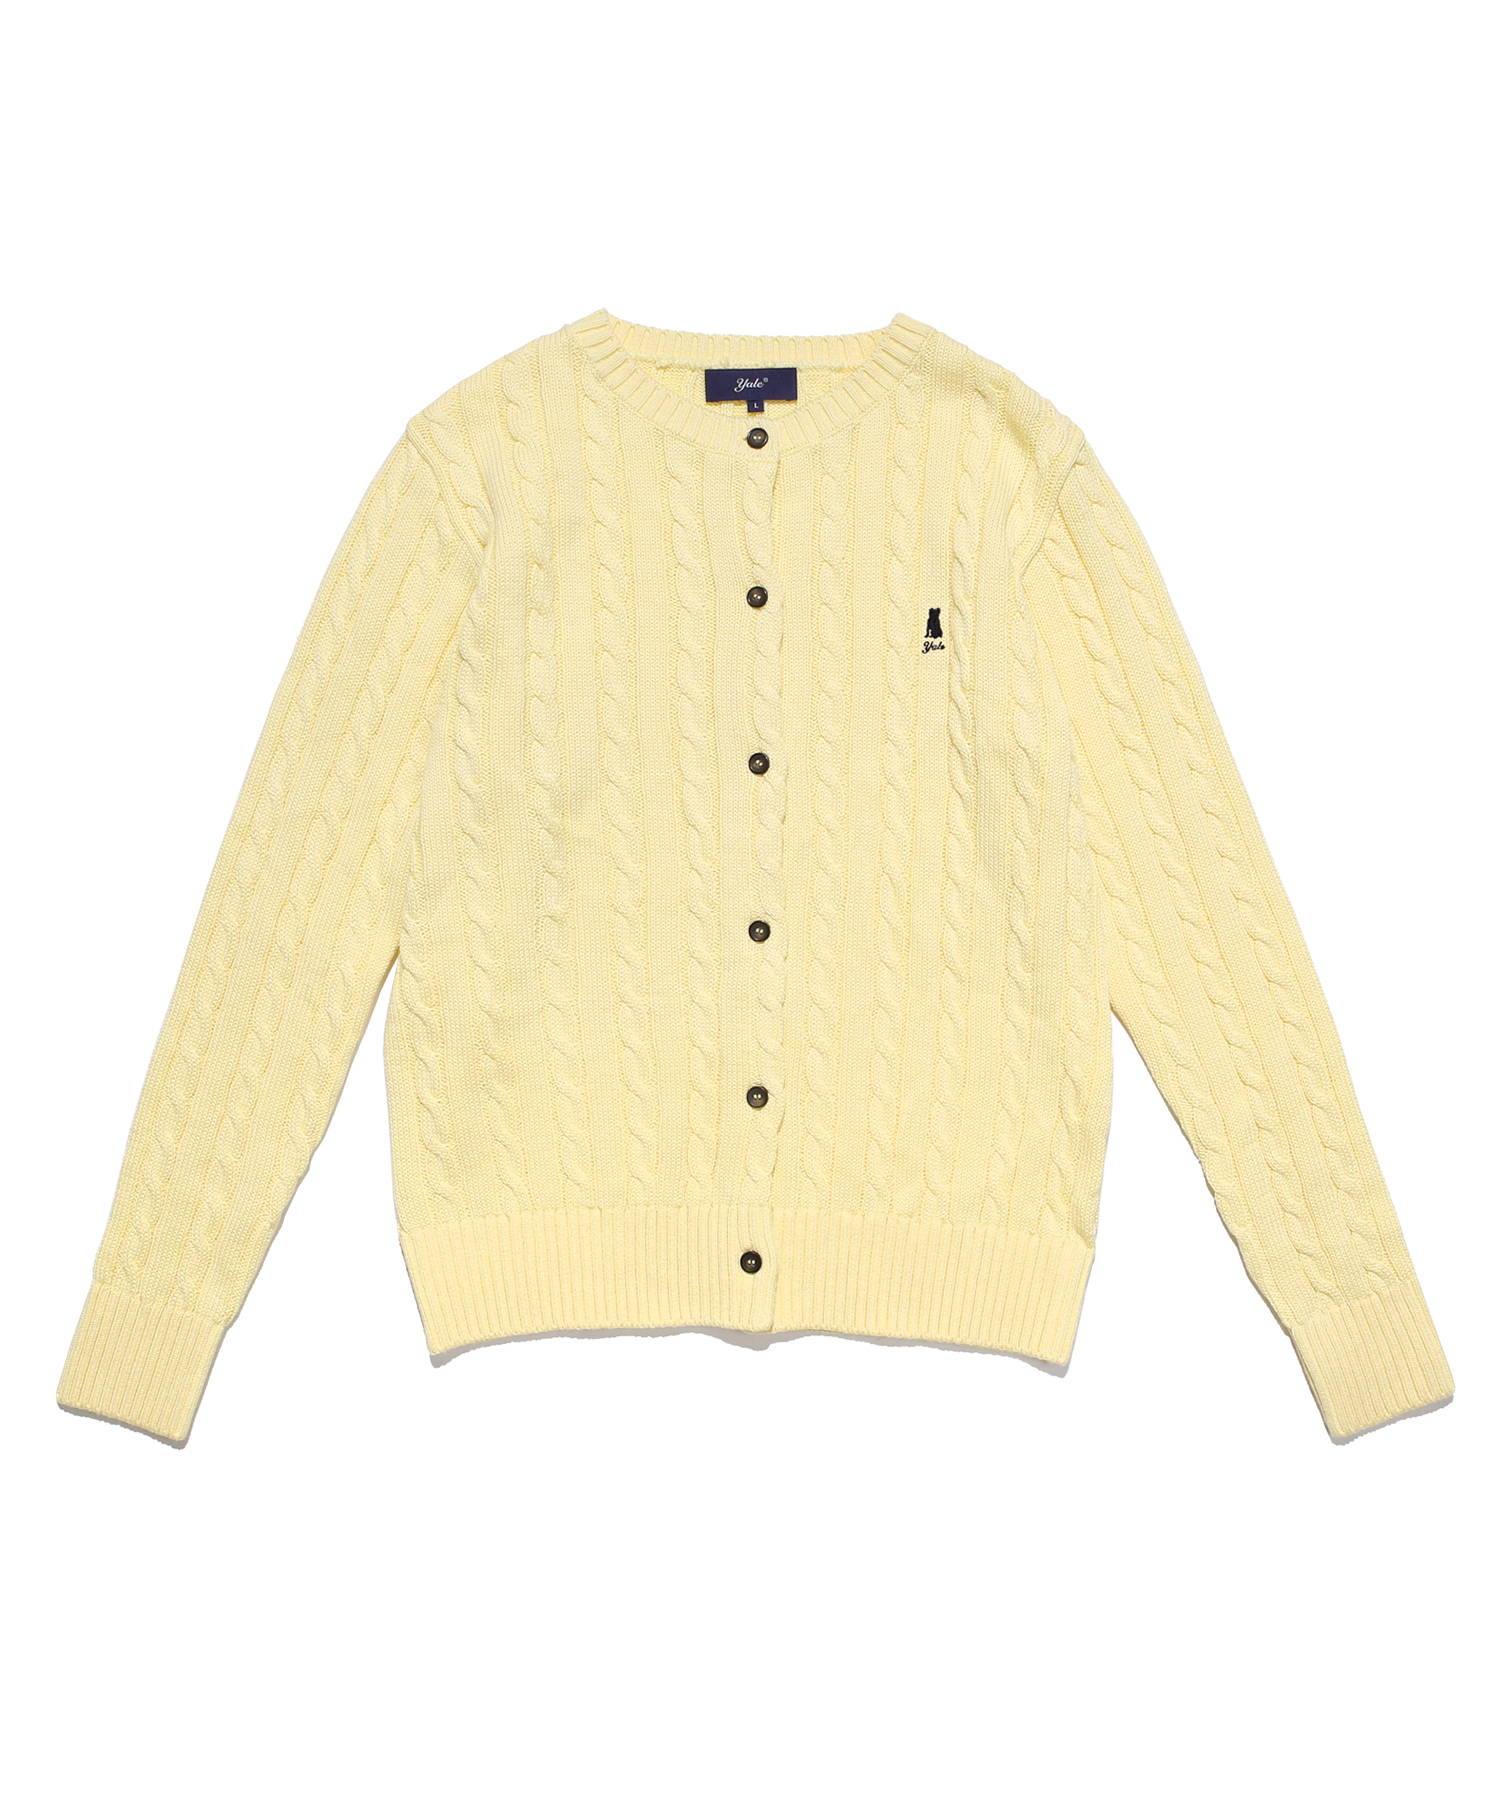 WOMENS HERITAGE CABLE KNIT CARDIGAN YELLOW